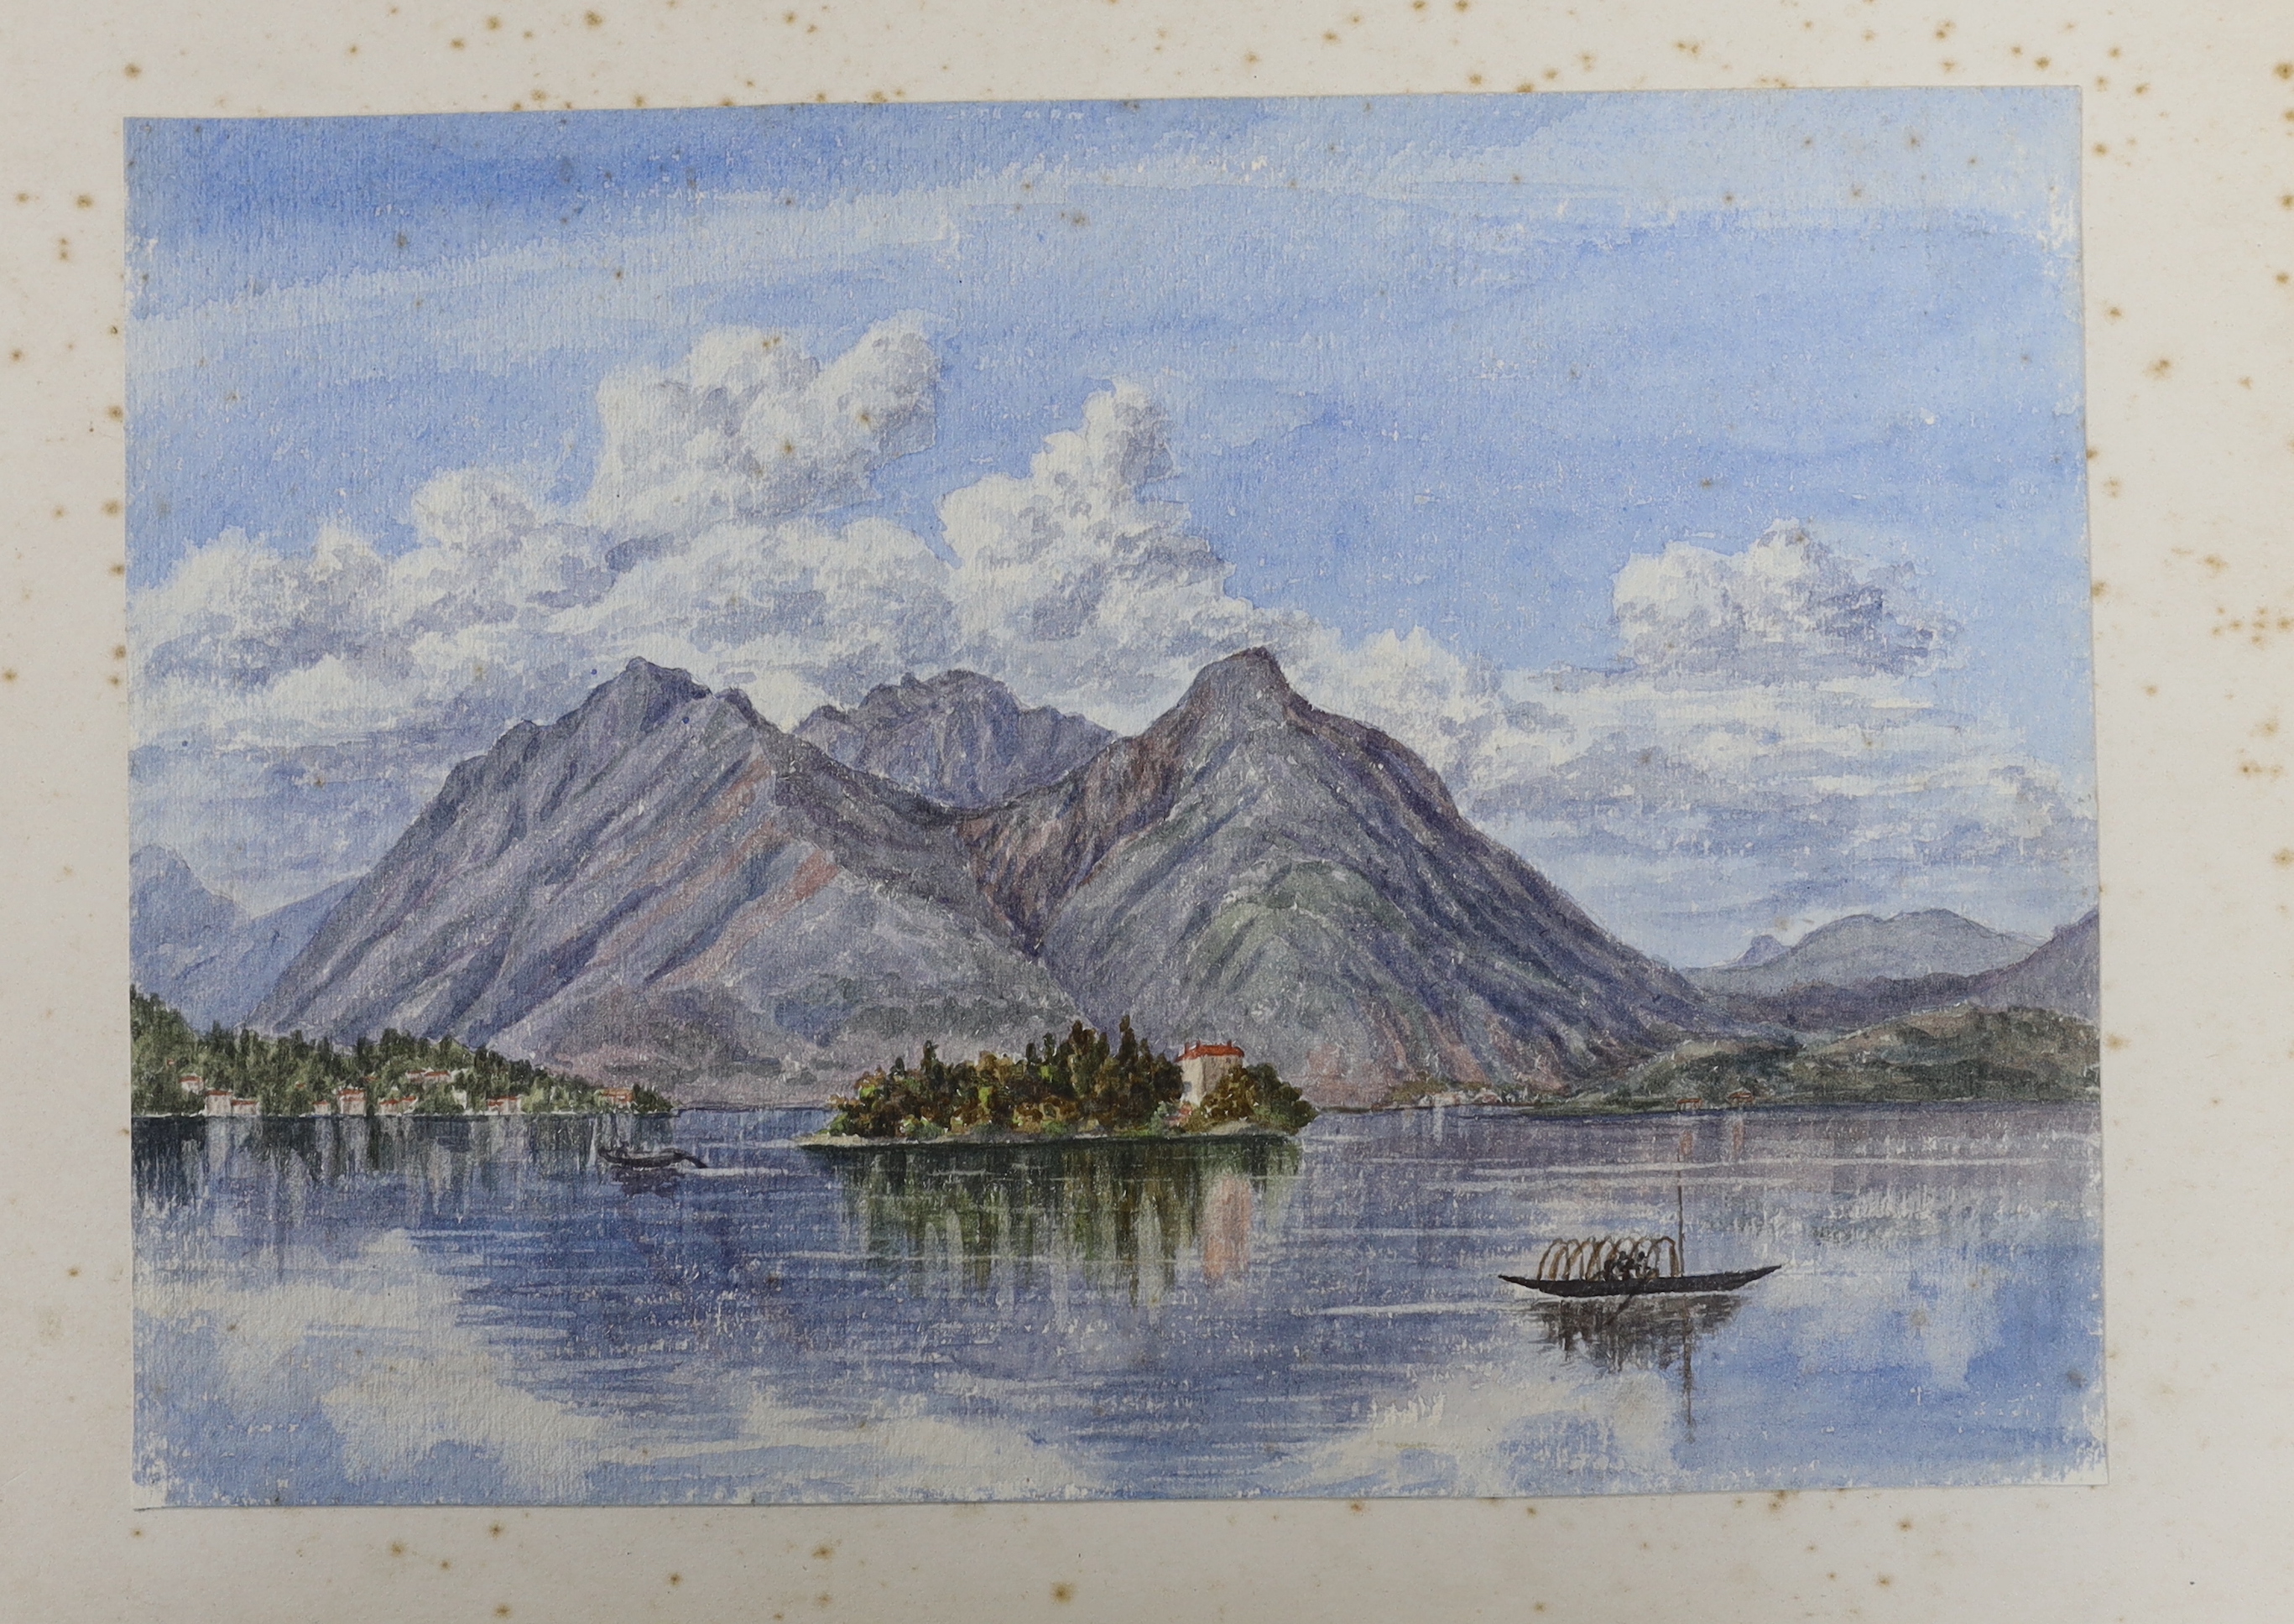 A late 19th / early 20th century album of watercolours and ink sketches, predominantly landscapes, including Torquay, Glasgow, table mountain, South Africa, Suez Canal and the Arabian coast, 36 x 30cm